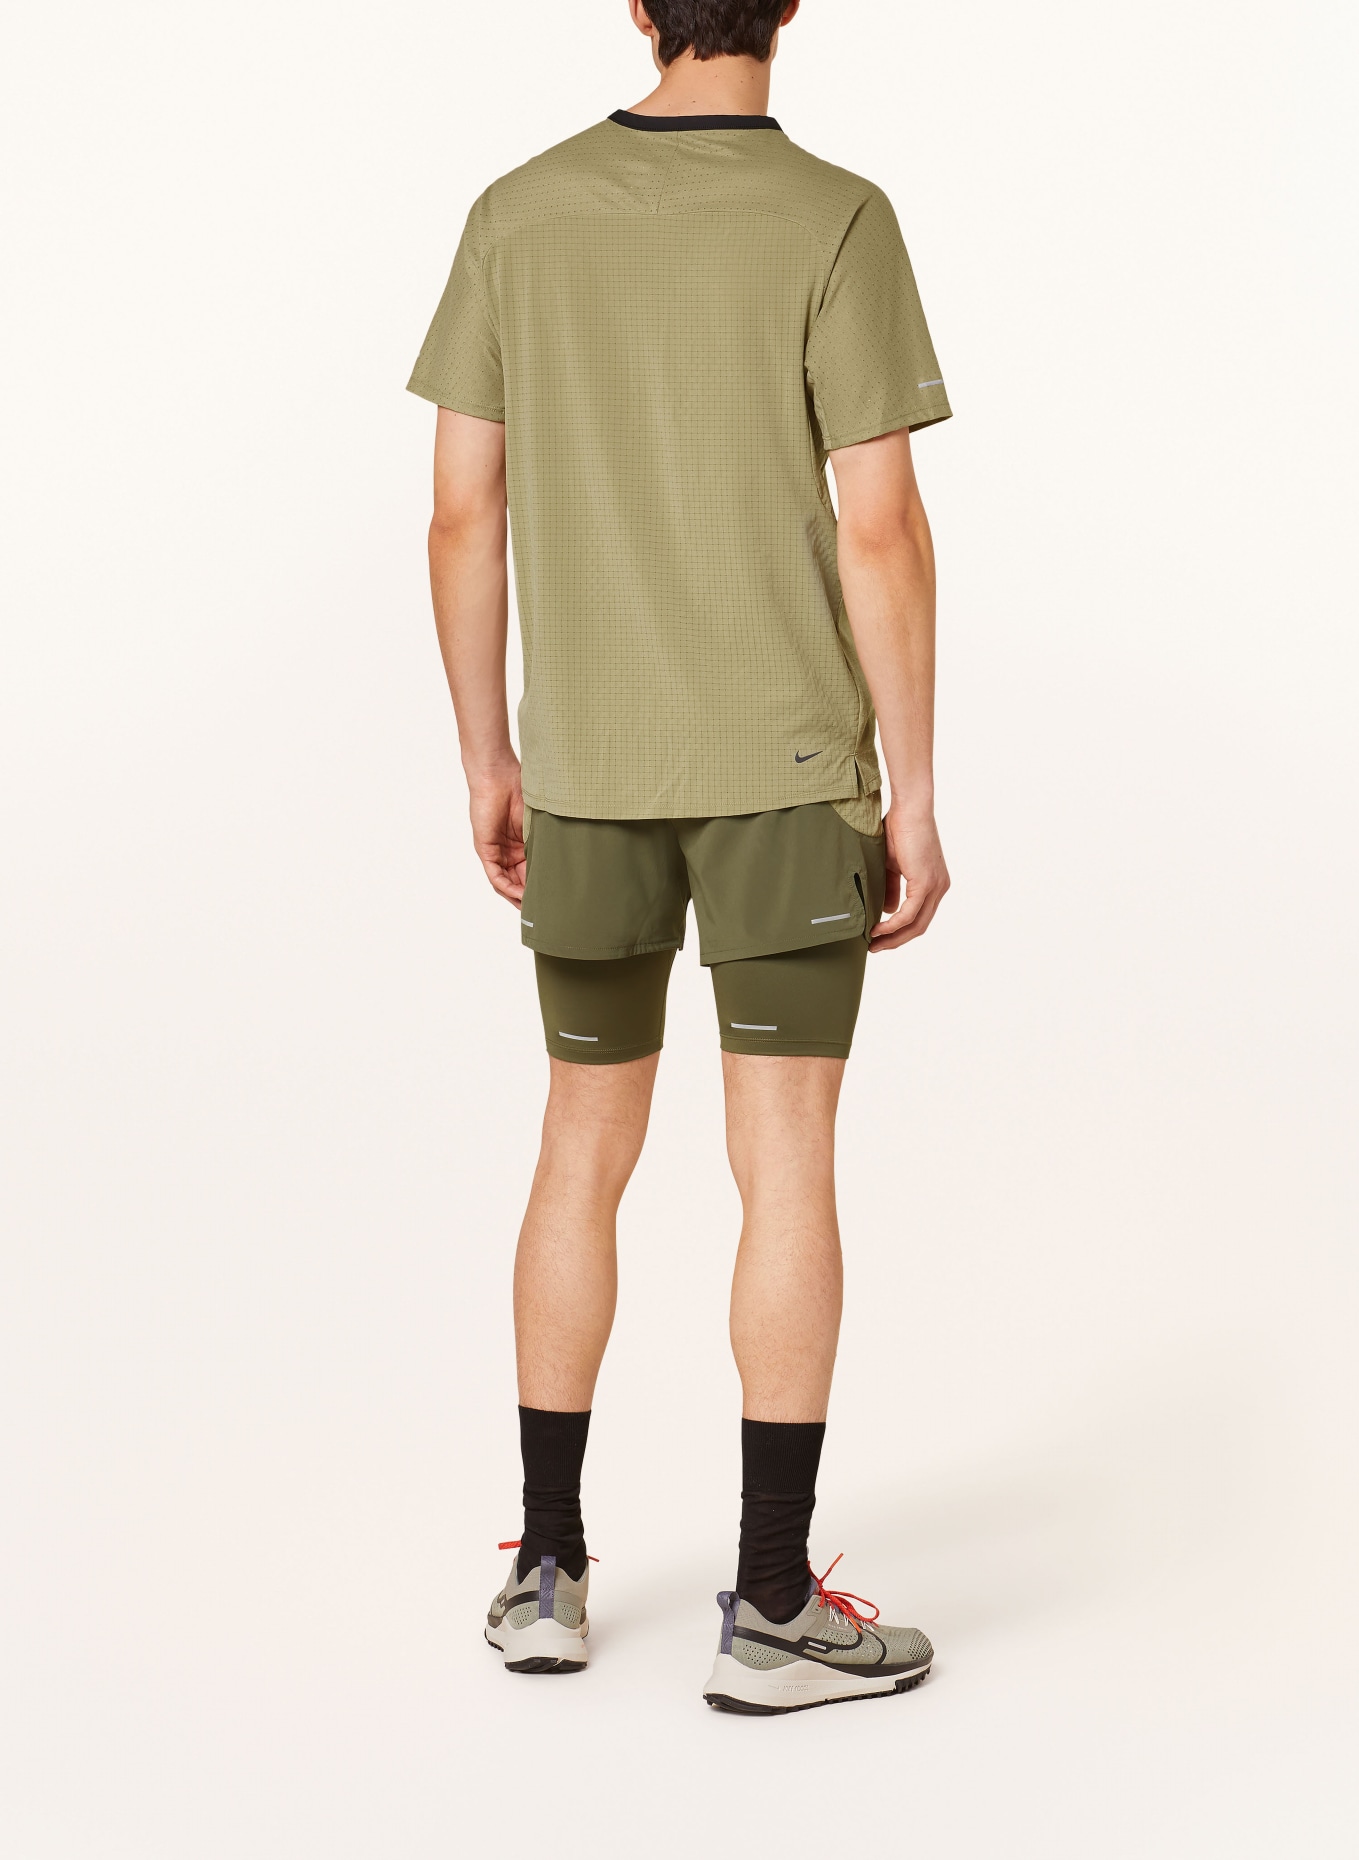 Nike Running shirt TRAIL SOLAR CHASE, Color: OLIVE (Image 3)